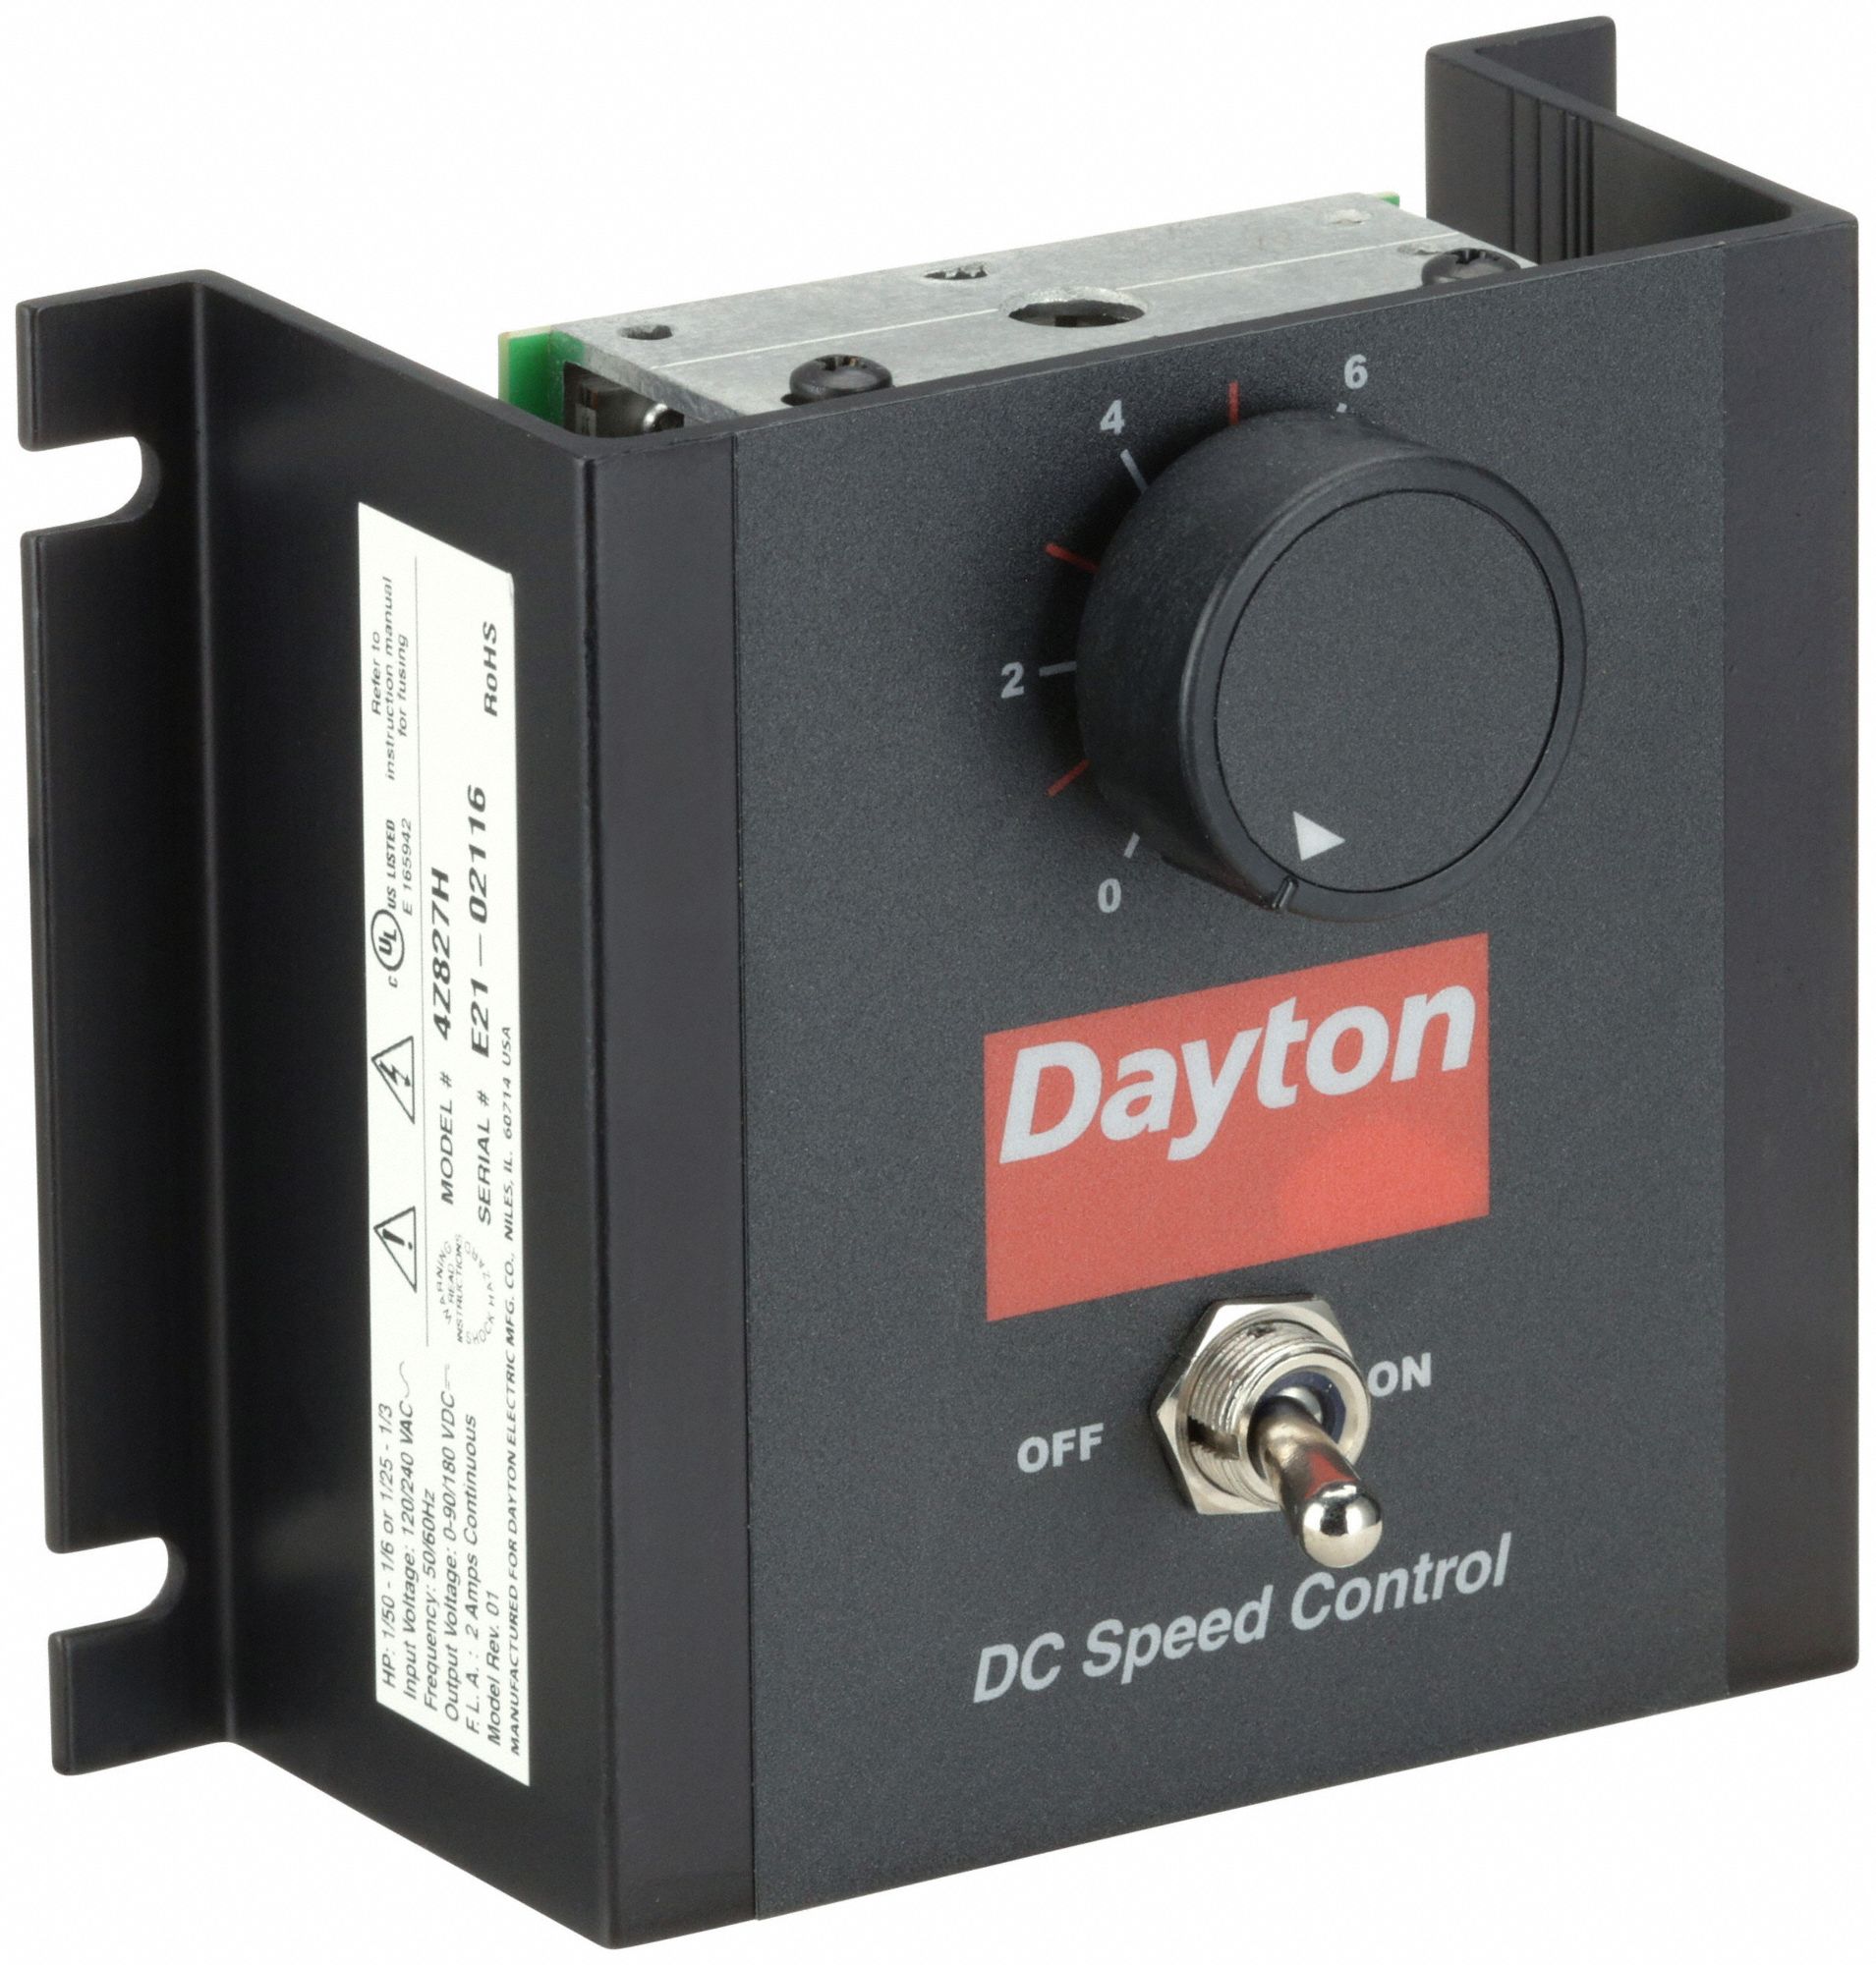 DAYTON DC Speed Control: SCR, Open, 2 A Max Current, 0 to 90/180V DC, 25:1,  Single Direction, ON/OFF